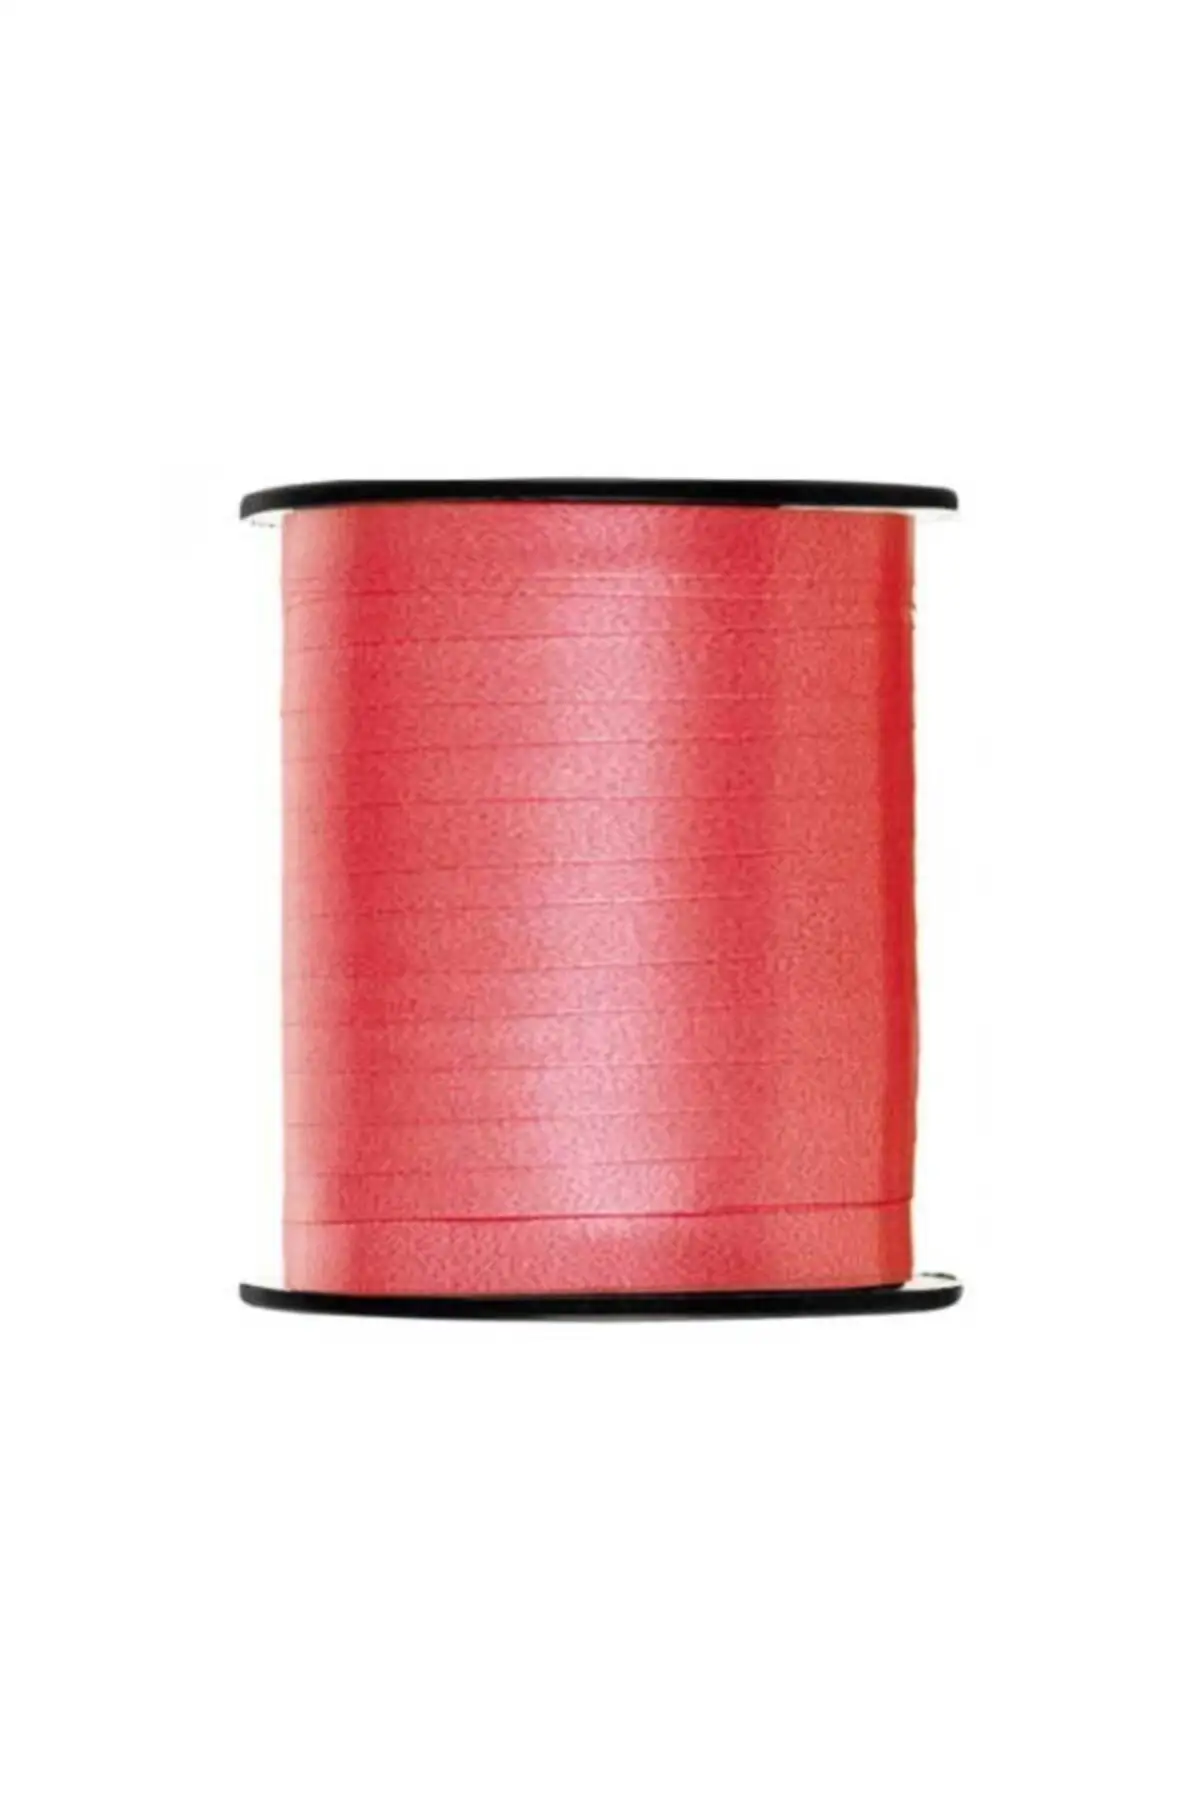 

Red Coil Raffia Pastel 8 mm 200 m Hobby Supplies & Entertainment Life